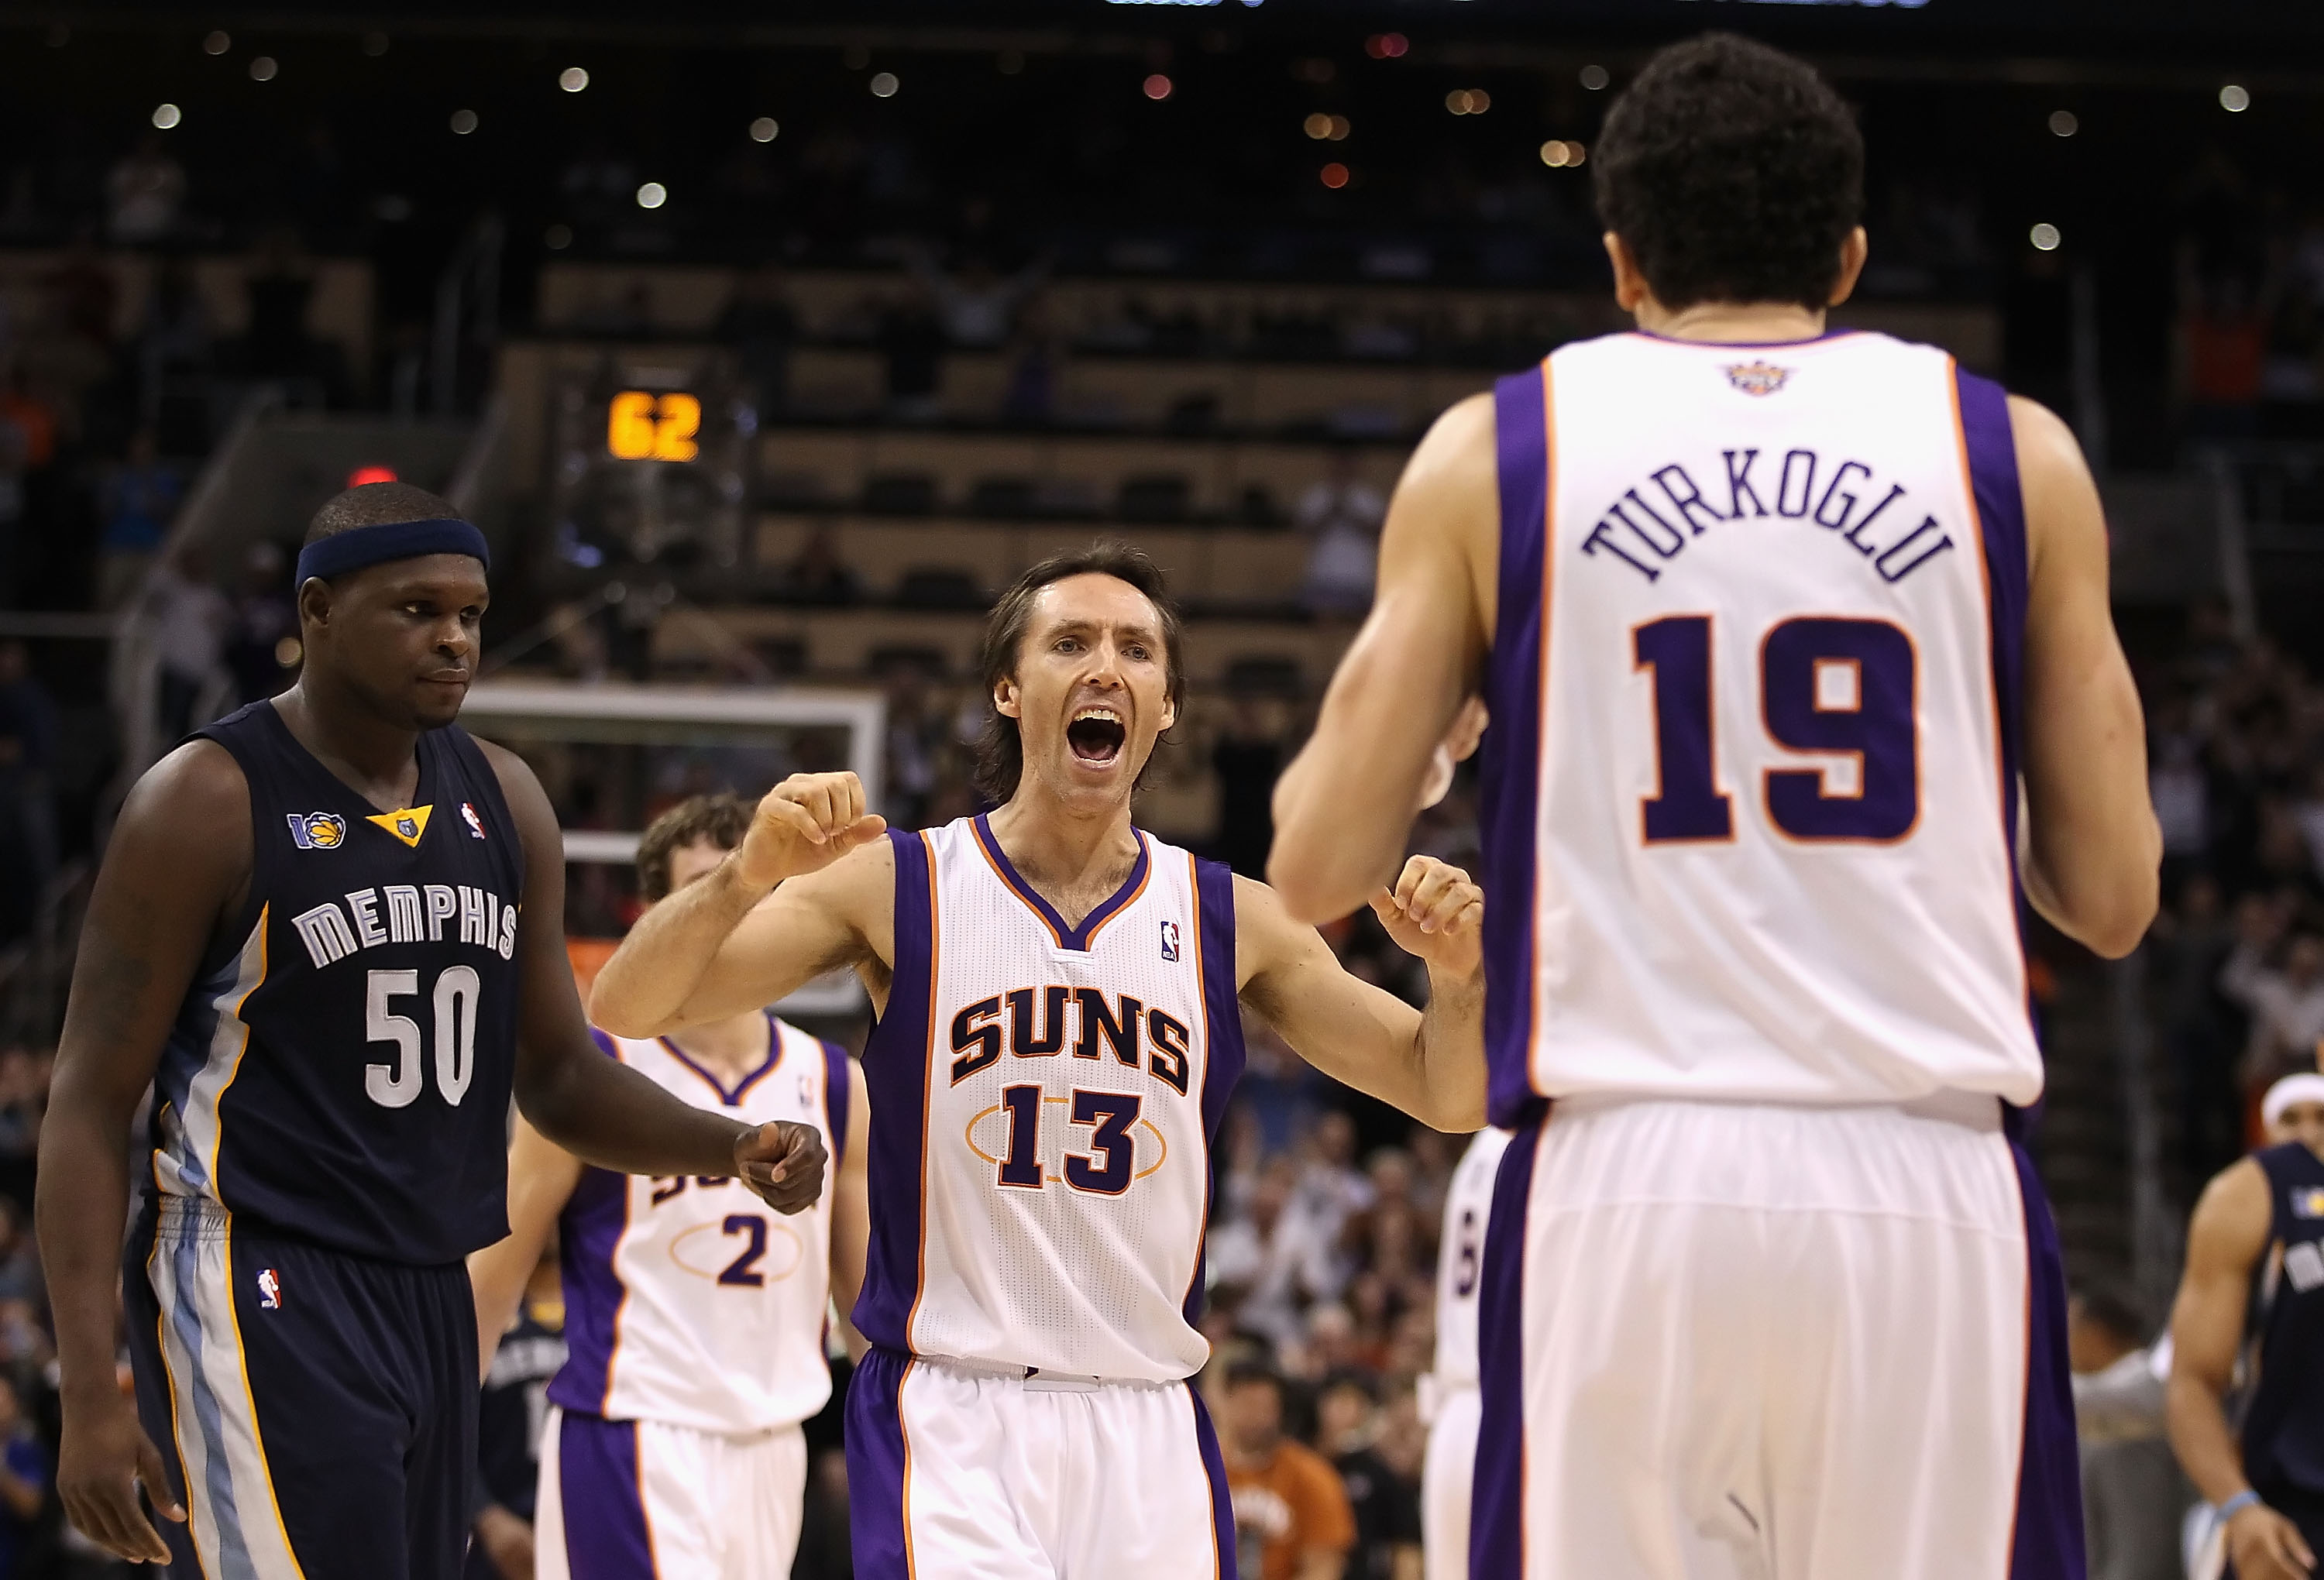 PHOENIX - DECEMBER 08:  Steve Nash #13 of the Phoenix Suns reacts after Hedo Turkoglu #19 hit a go ahead three point shot in the final moments of the NBA game against the Memphis Grizzlies at US Airways Center on December 8, 2010 in Phoenix, Arizona. The 